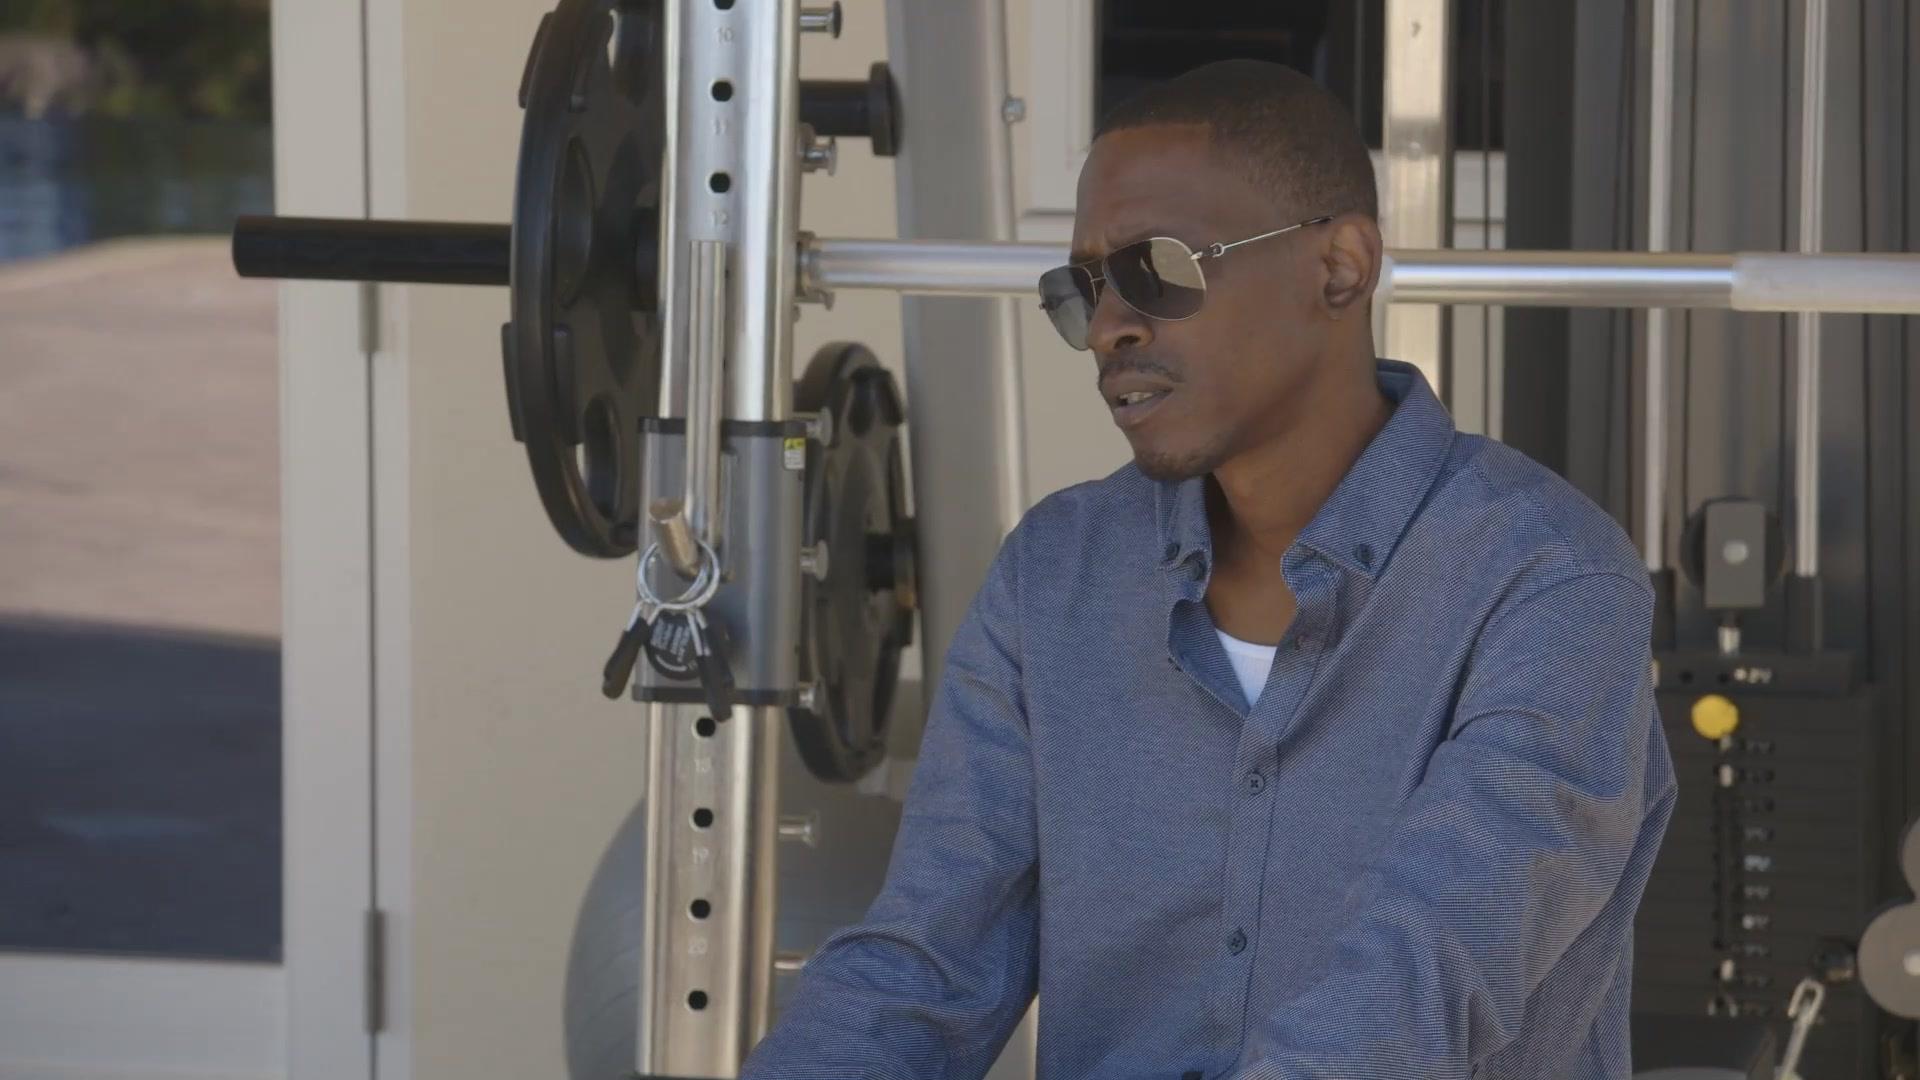 Watch Kurupt Can't Seem to Take His Own Advice | Marriage Boot Camp: Hip Hop Edition Video Extras